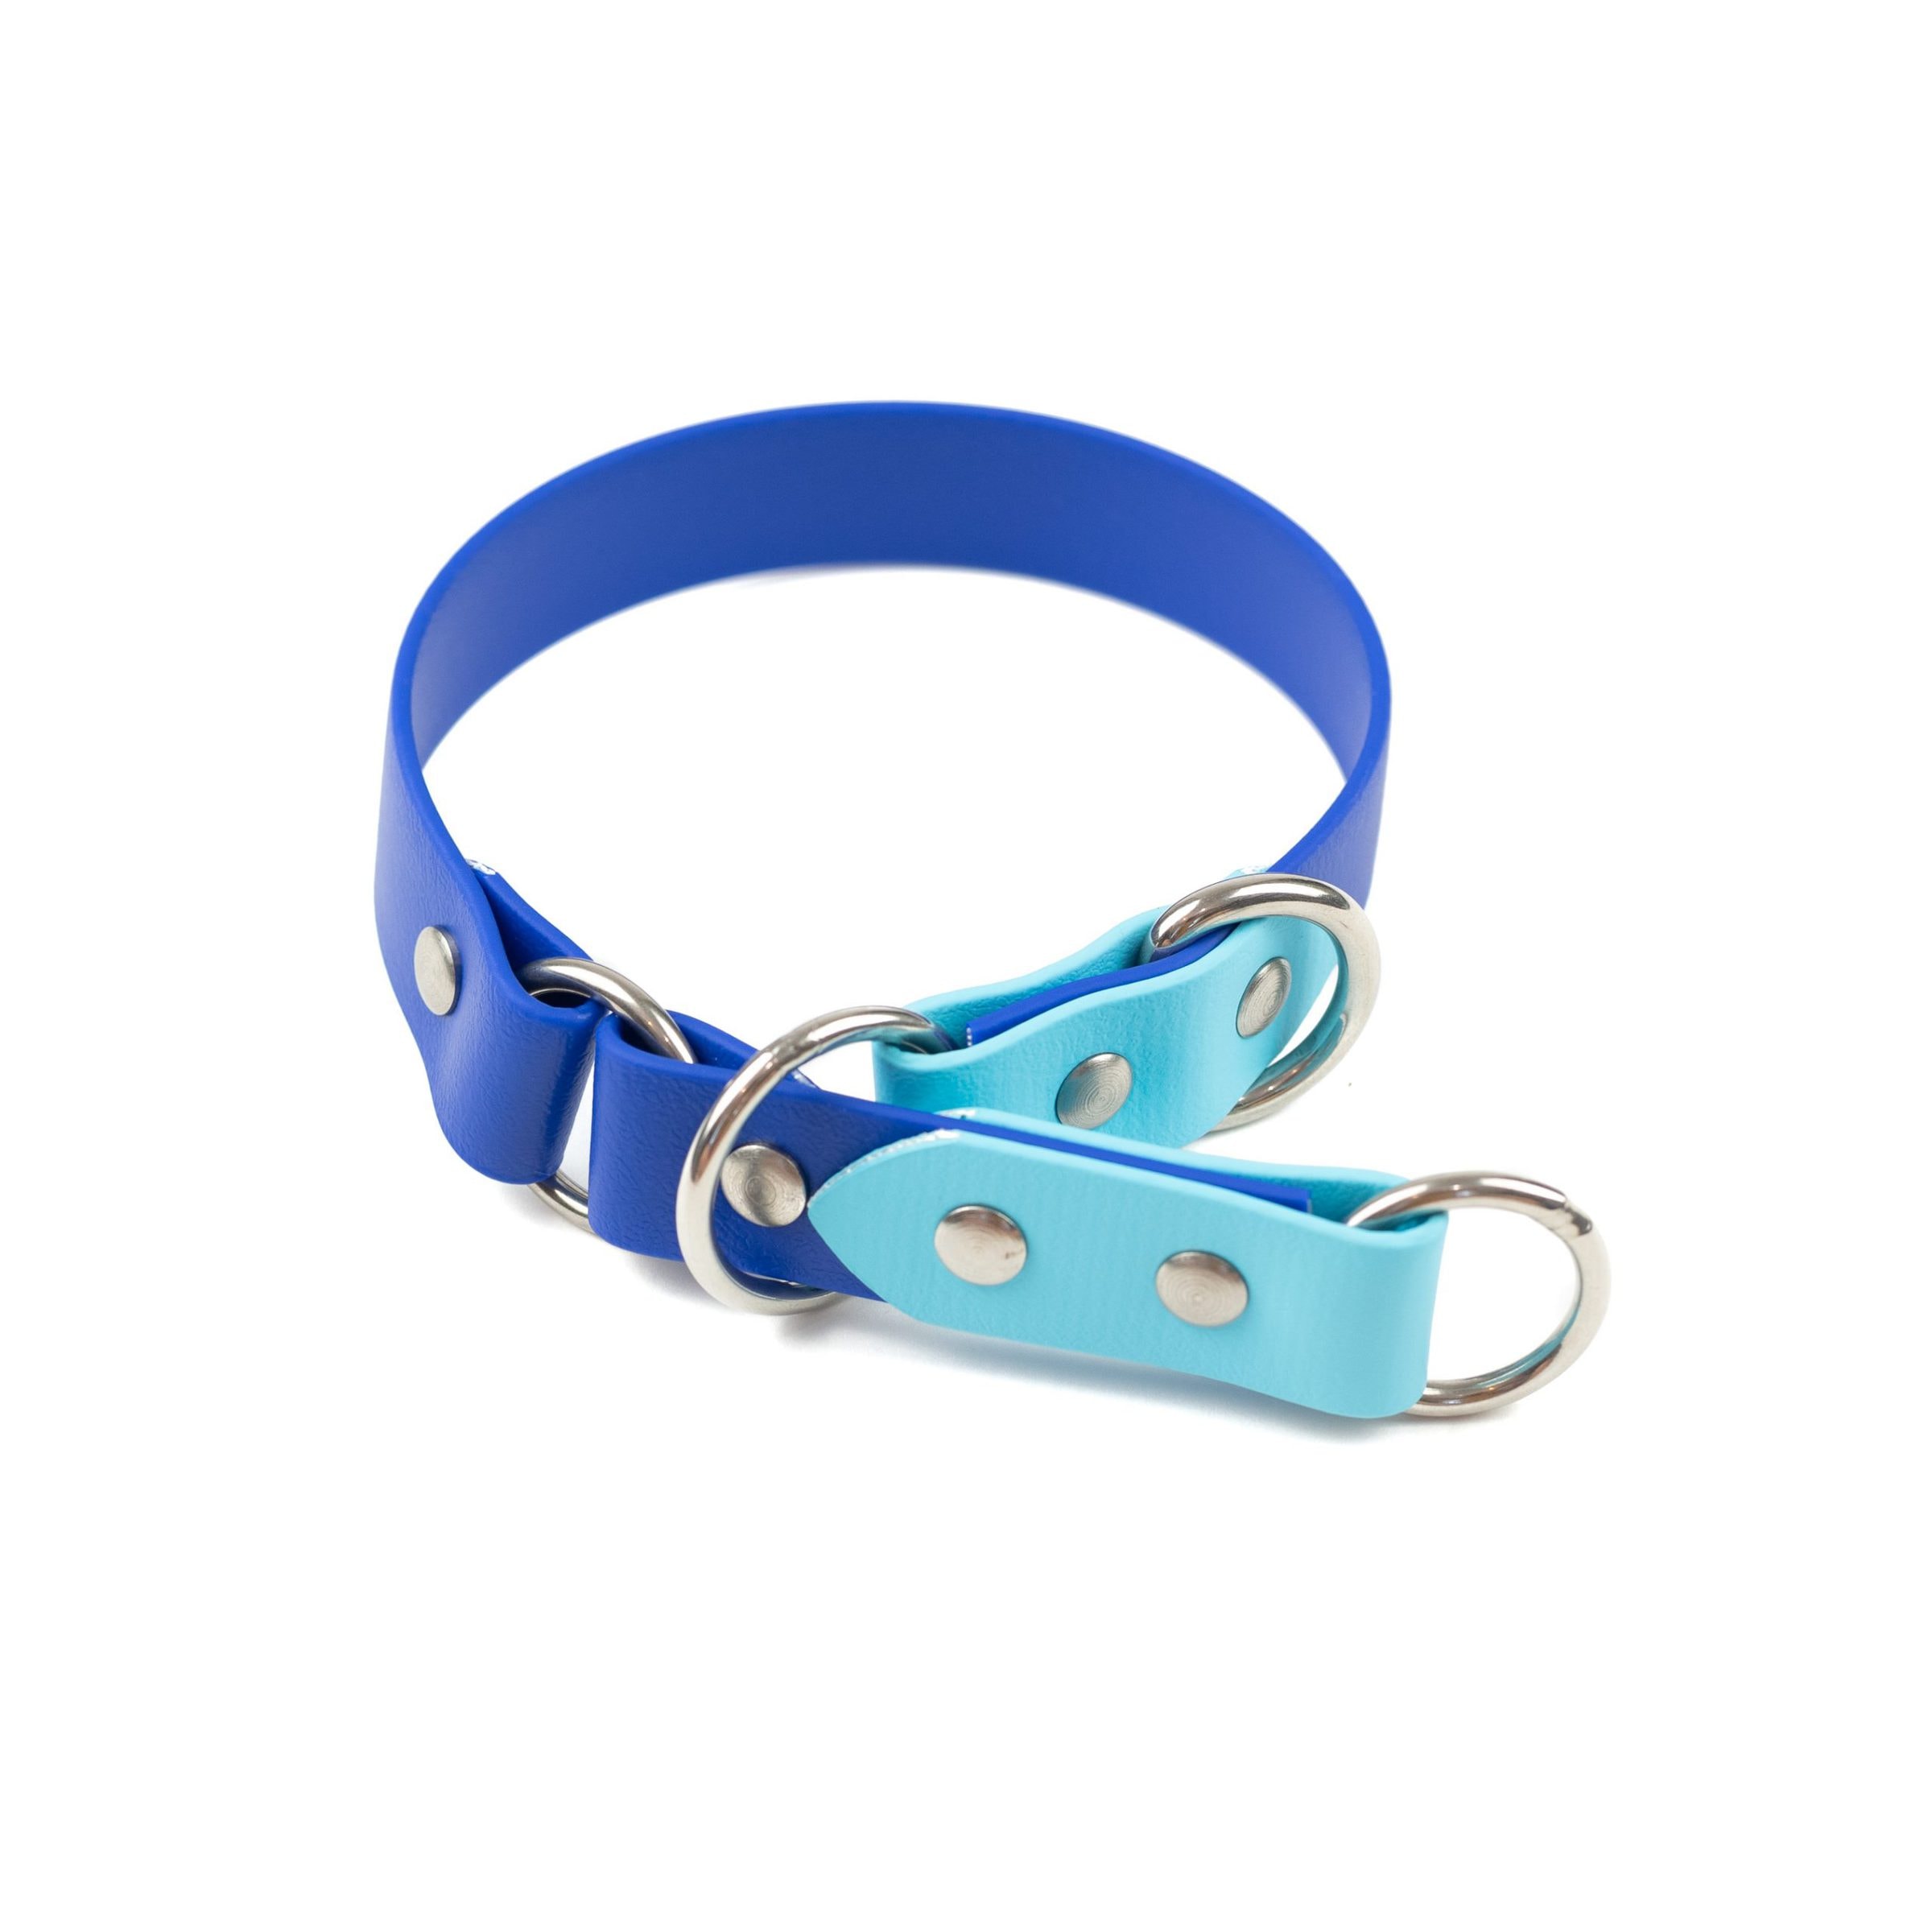 Blue tone 1" o-ring limited slip collar make from biothane